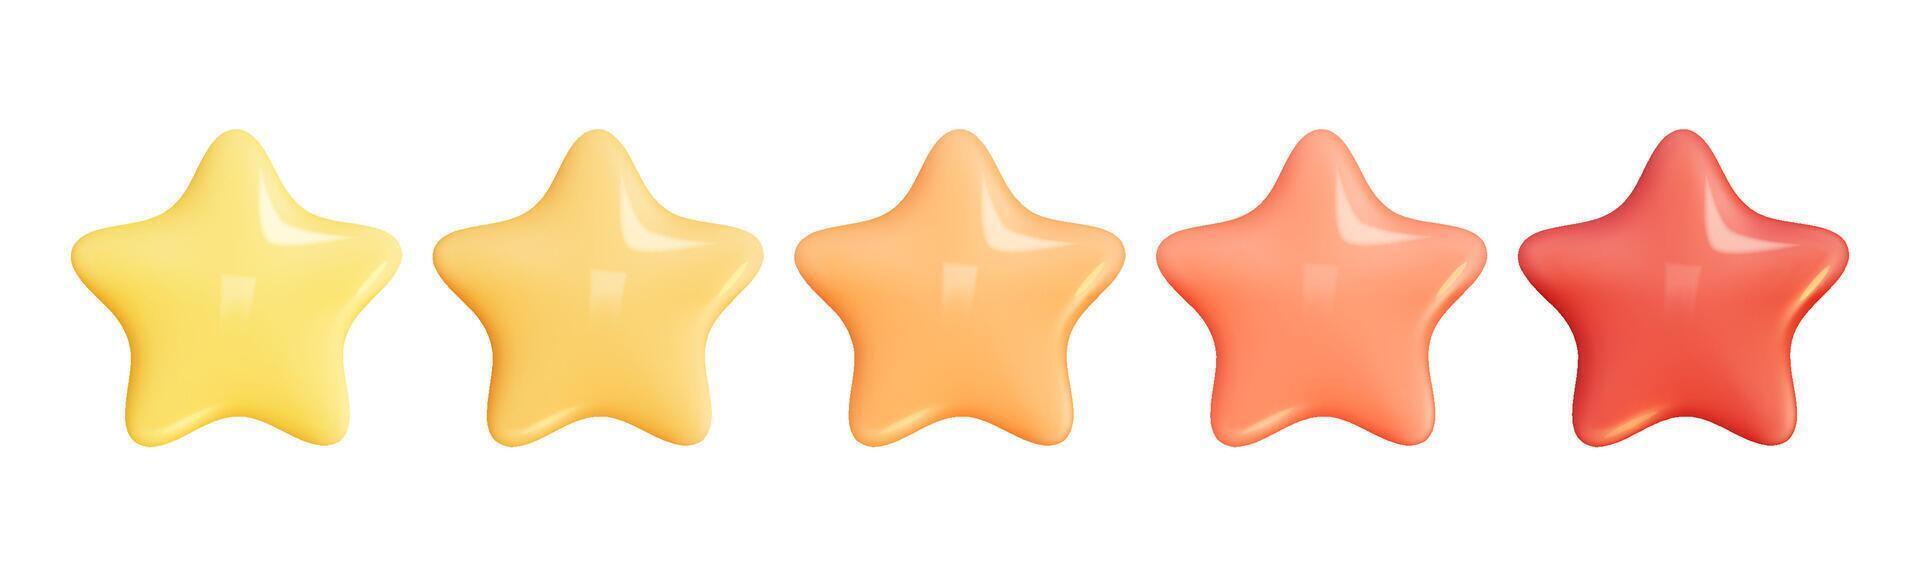 Star 3D Review plastic render. Set star for feedback and rank. 3d cartoon game element. Shape for app and game design. illustration. vector